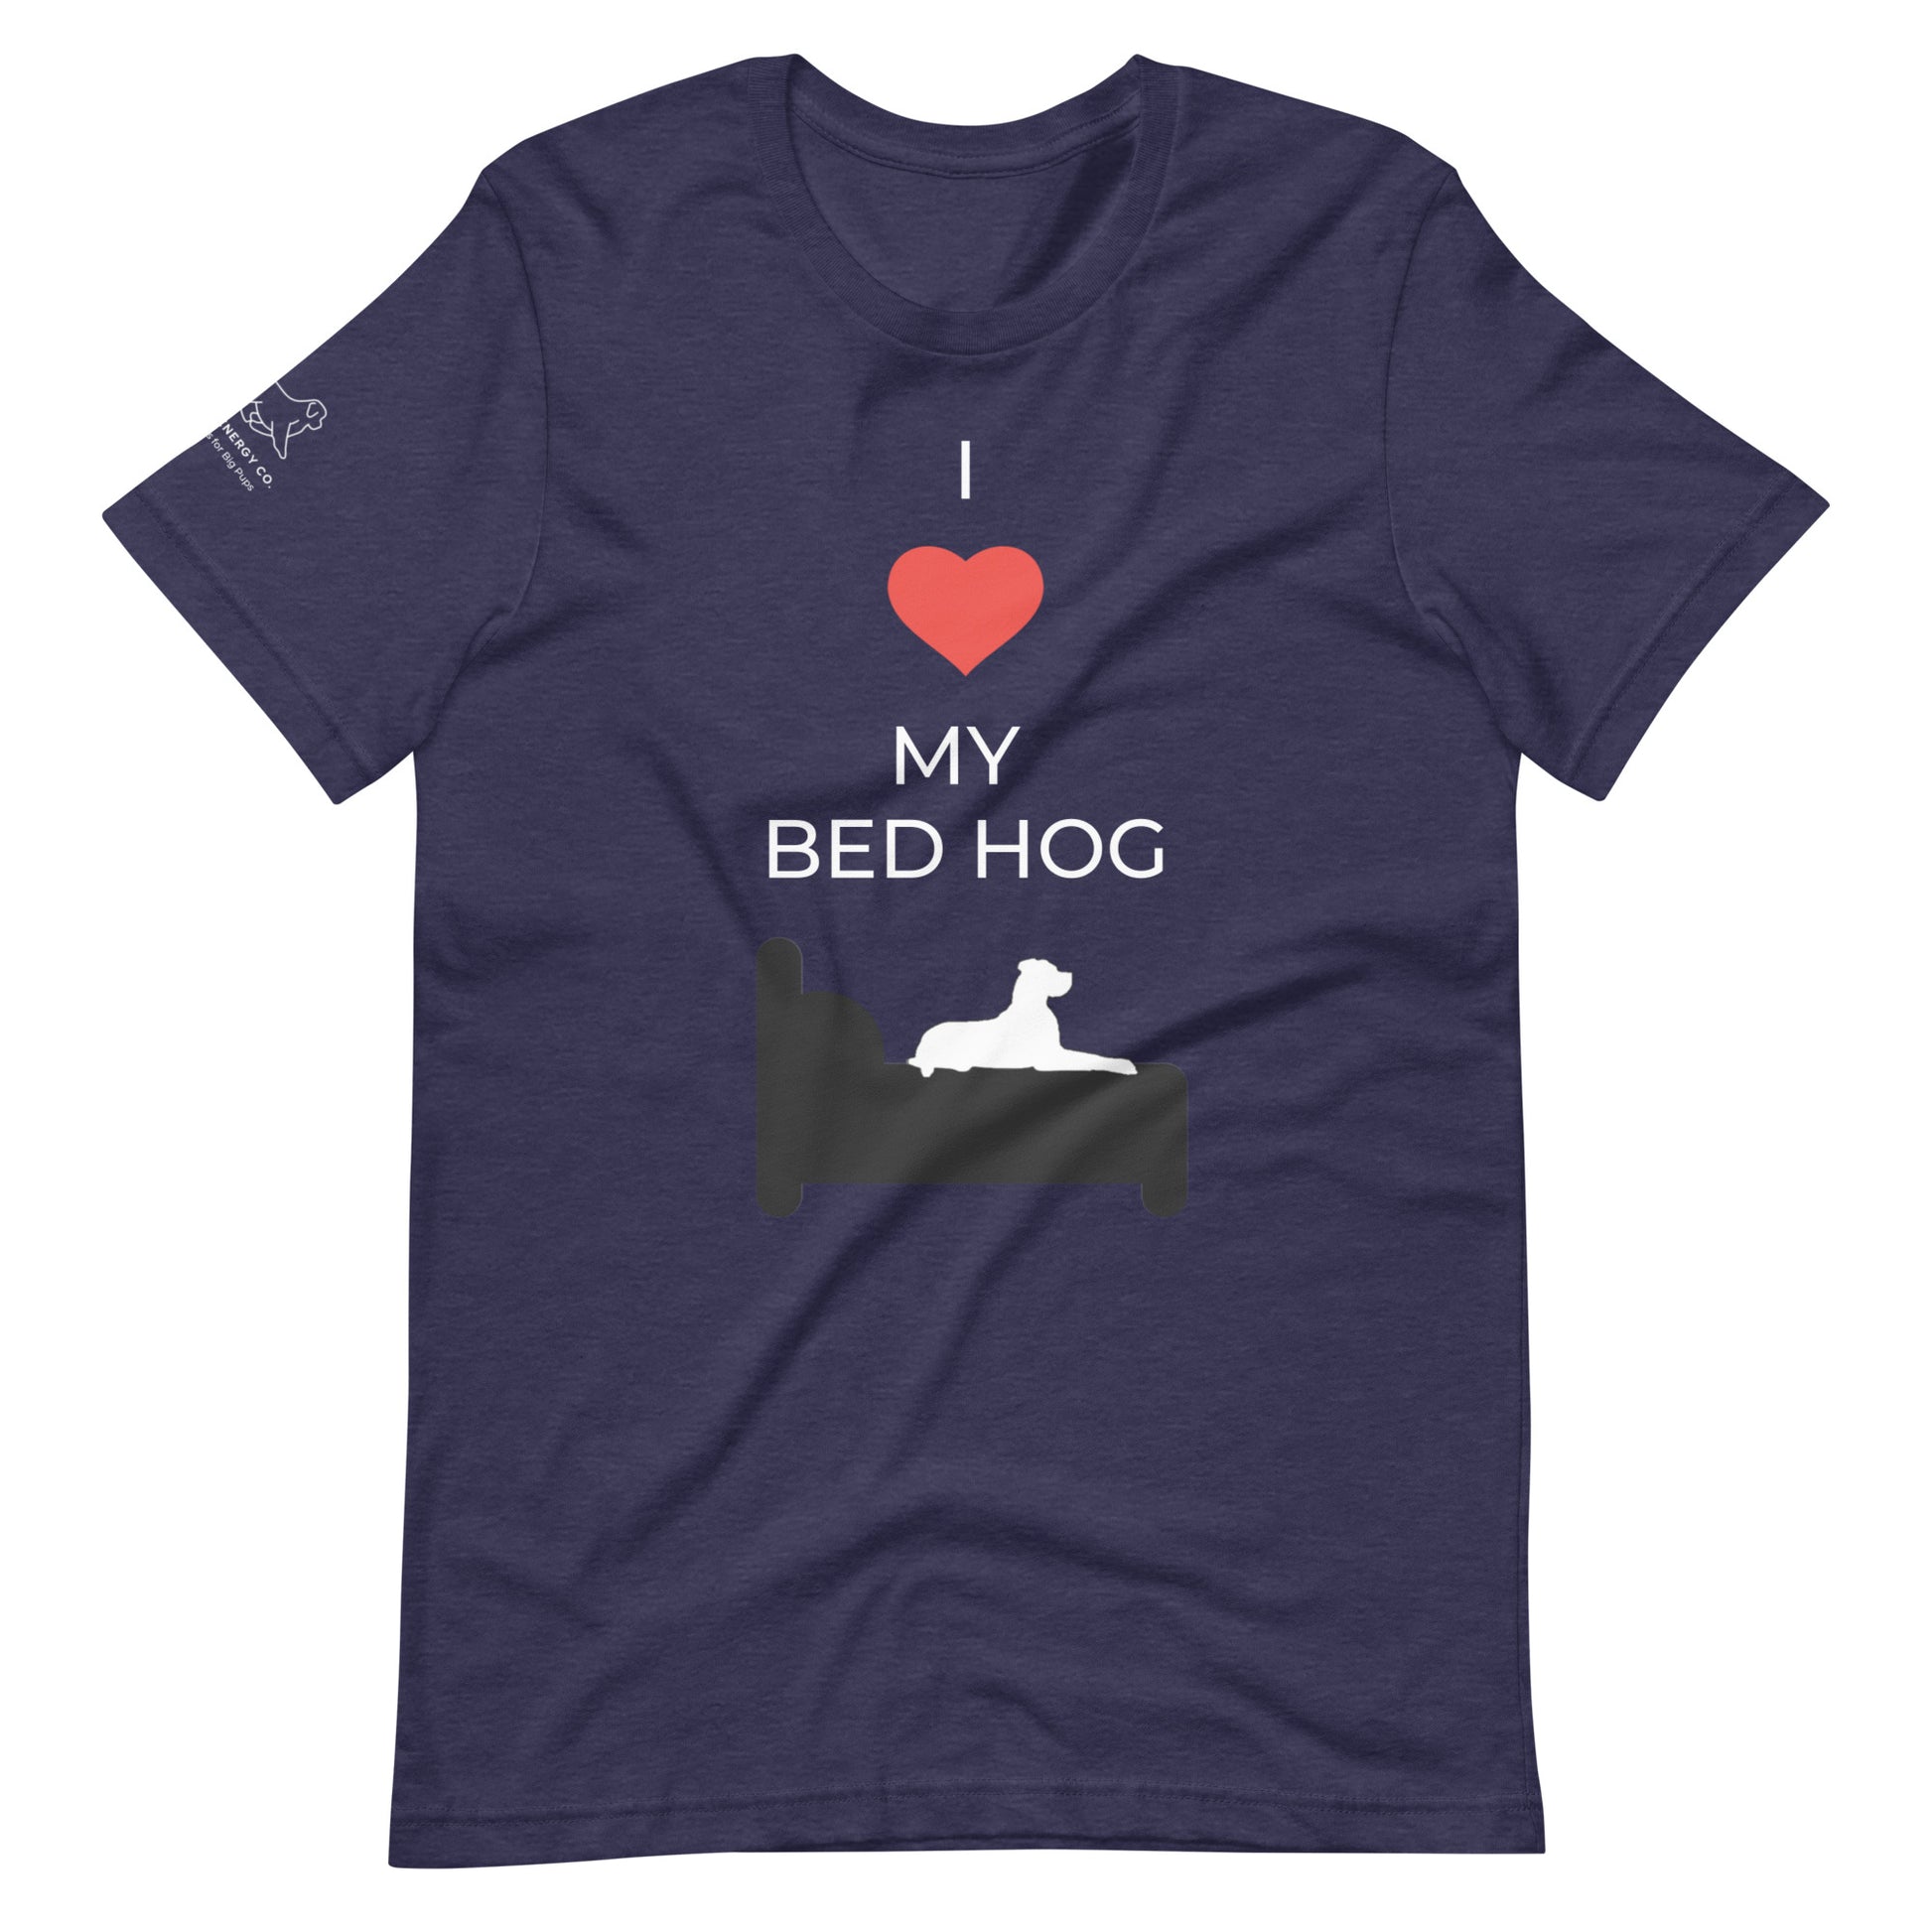 Front of a heather midnight navy t-shirt that reads "I love my bed hog" in white text over an illustration that is the white silhouette of a large dog laying on the deep gray silhouette of a bed. The word "love" is replaced by a red heart symbol.